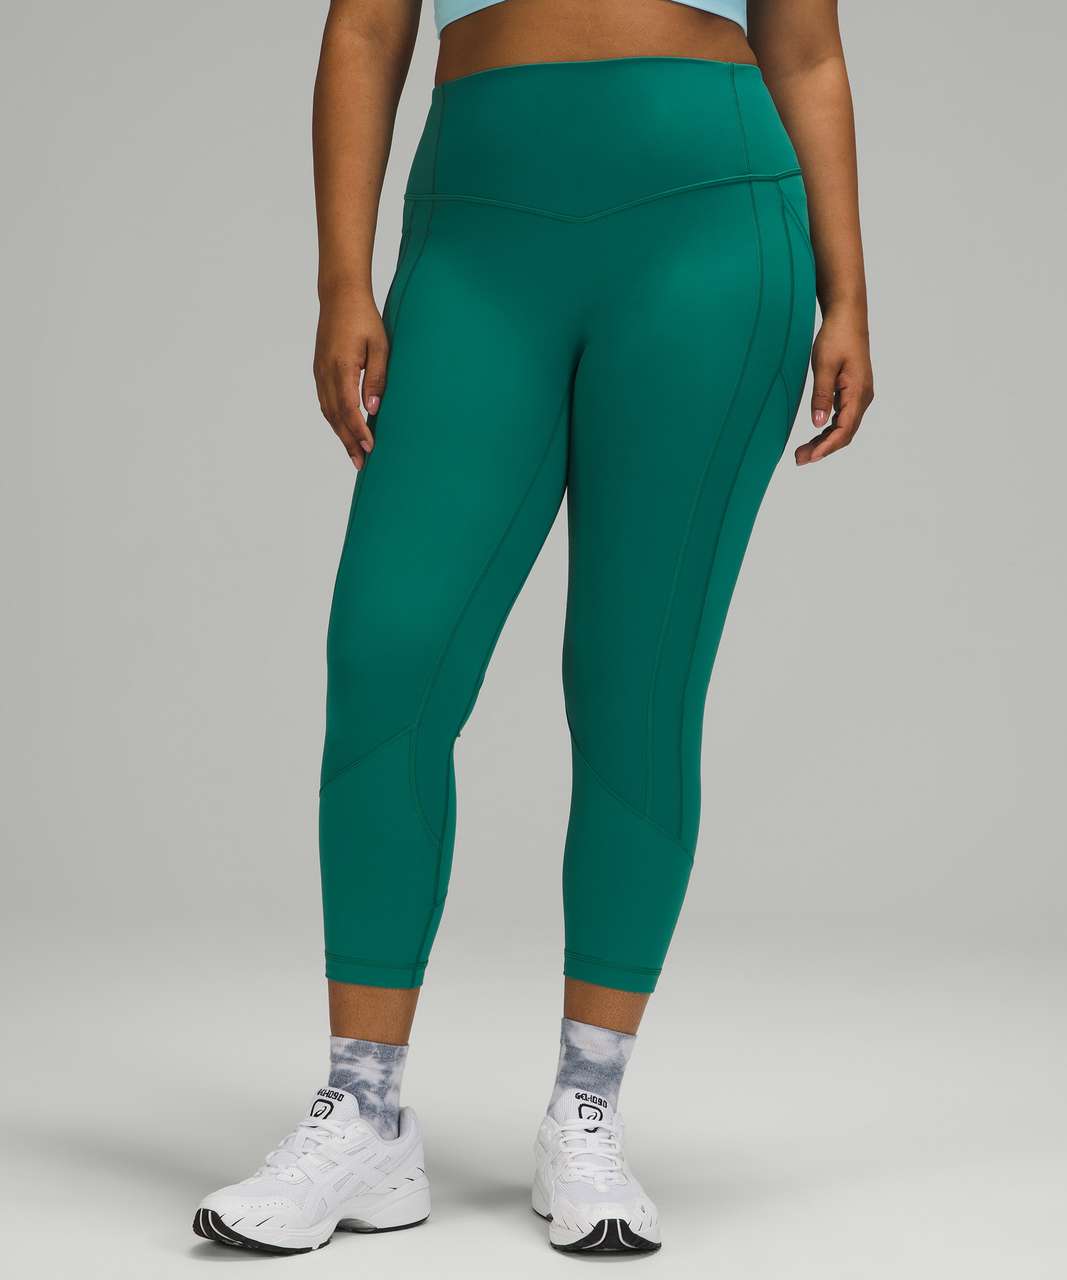 Lululemon All The Right Places Crop *23" - Teal Lagoon